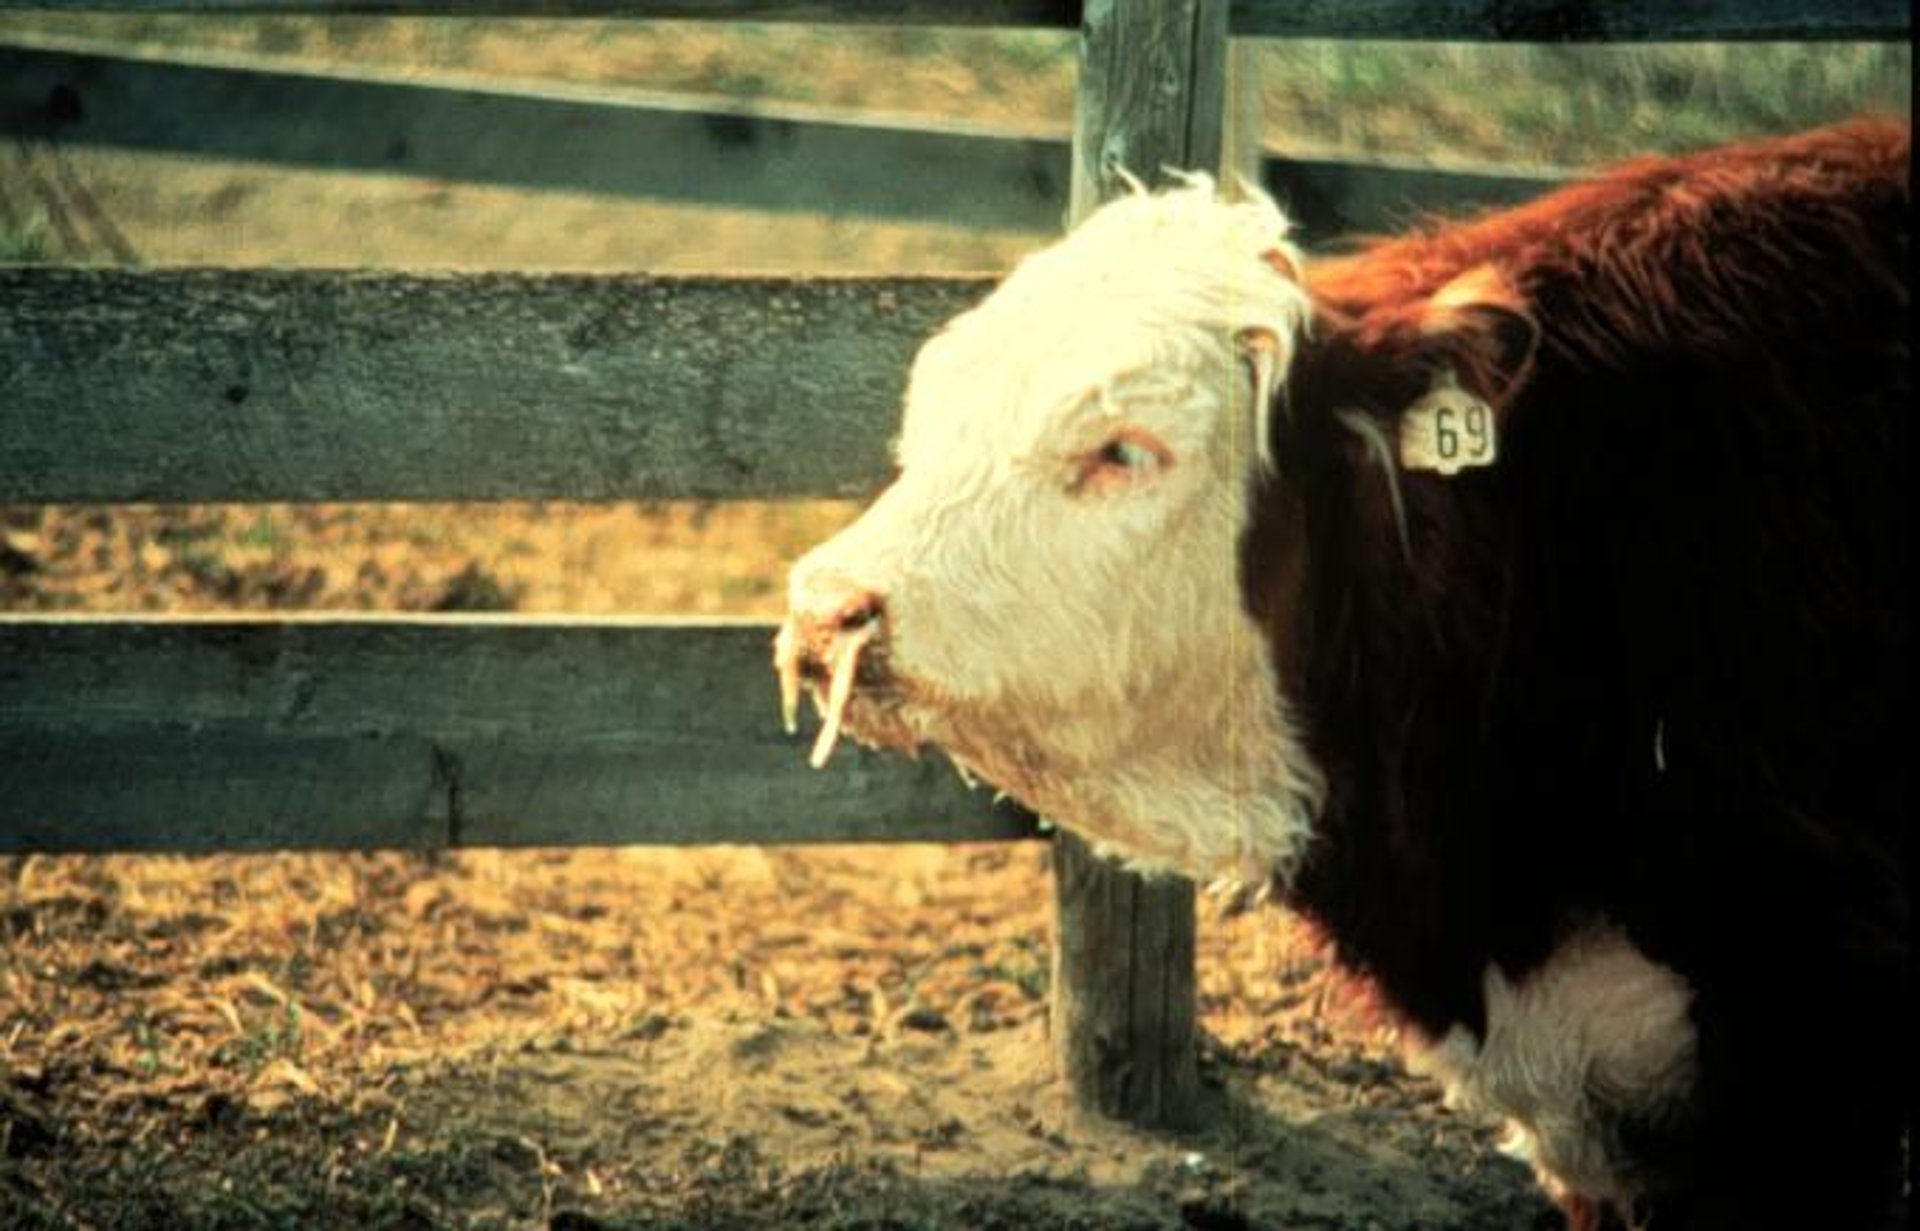 Bovine respiratory disease, clinical signs